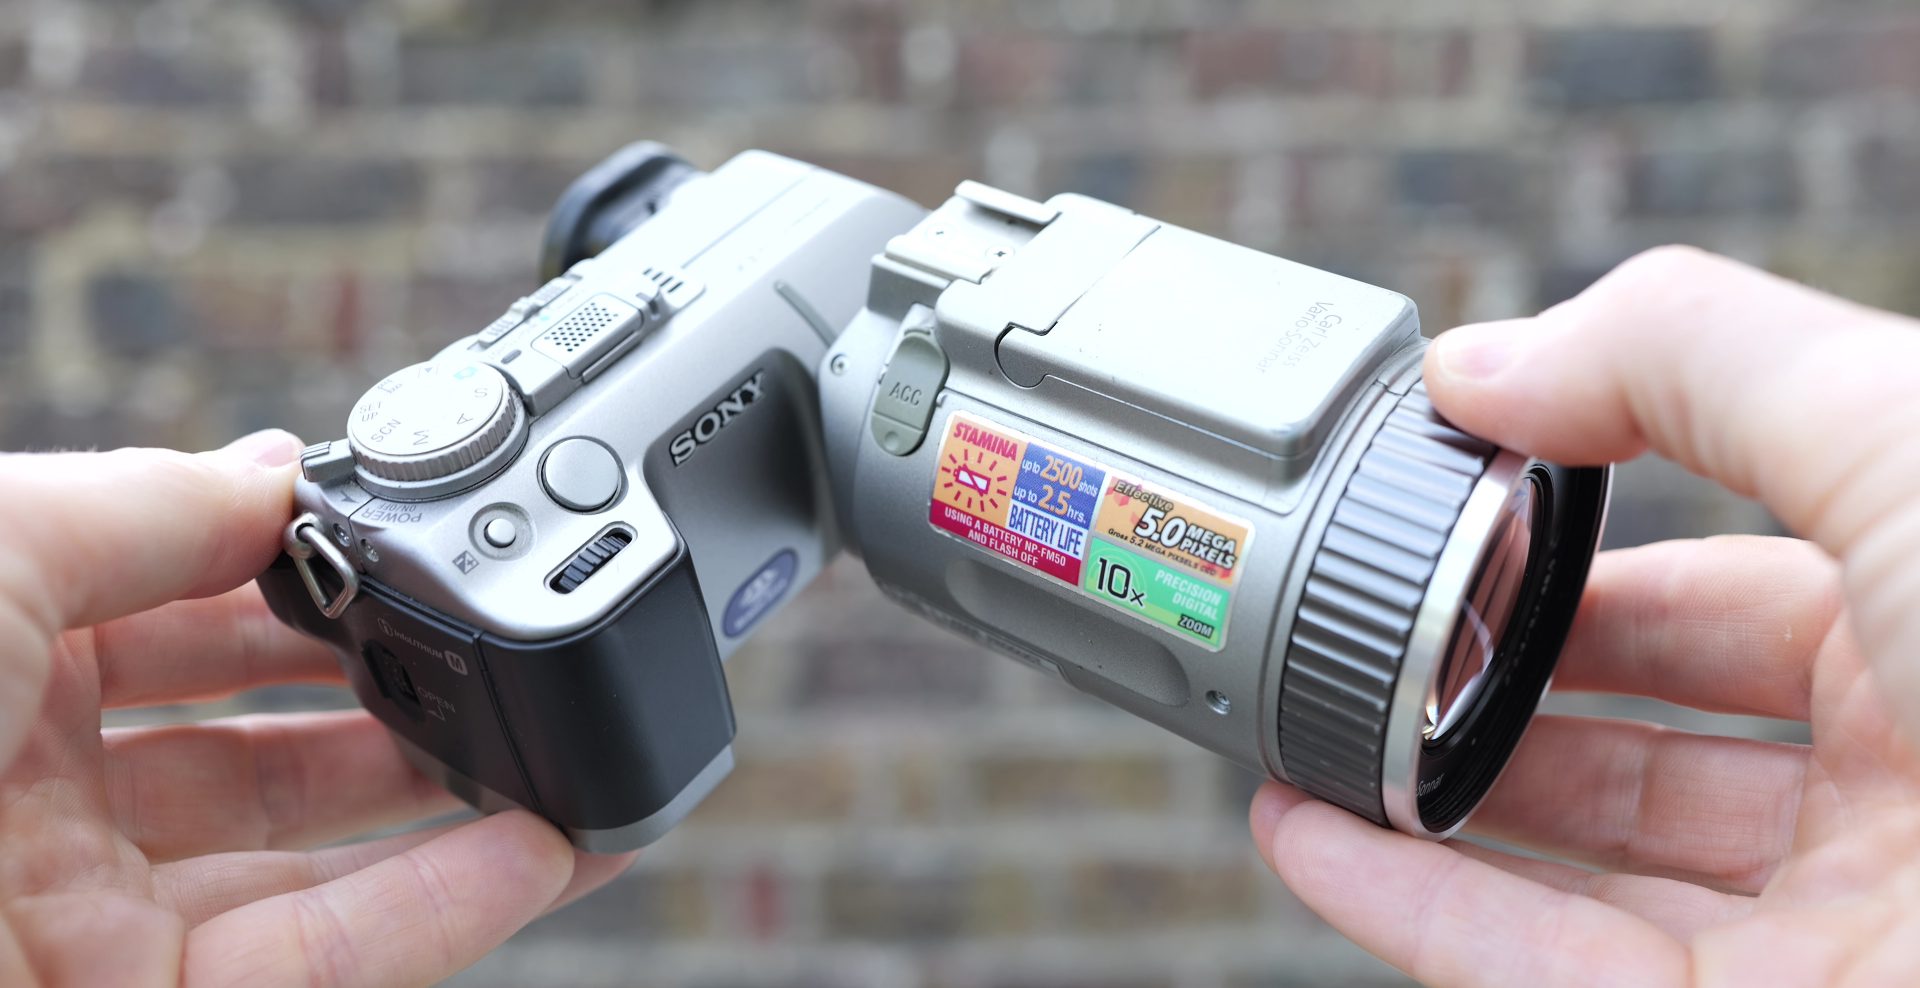 Sony Cyber-shot F707 RETRO review | Cameralabs